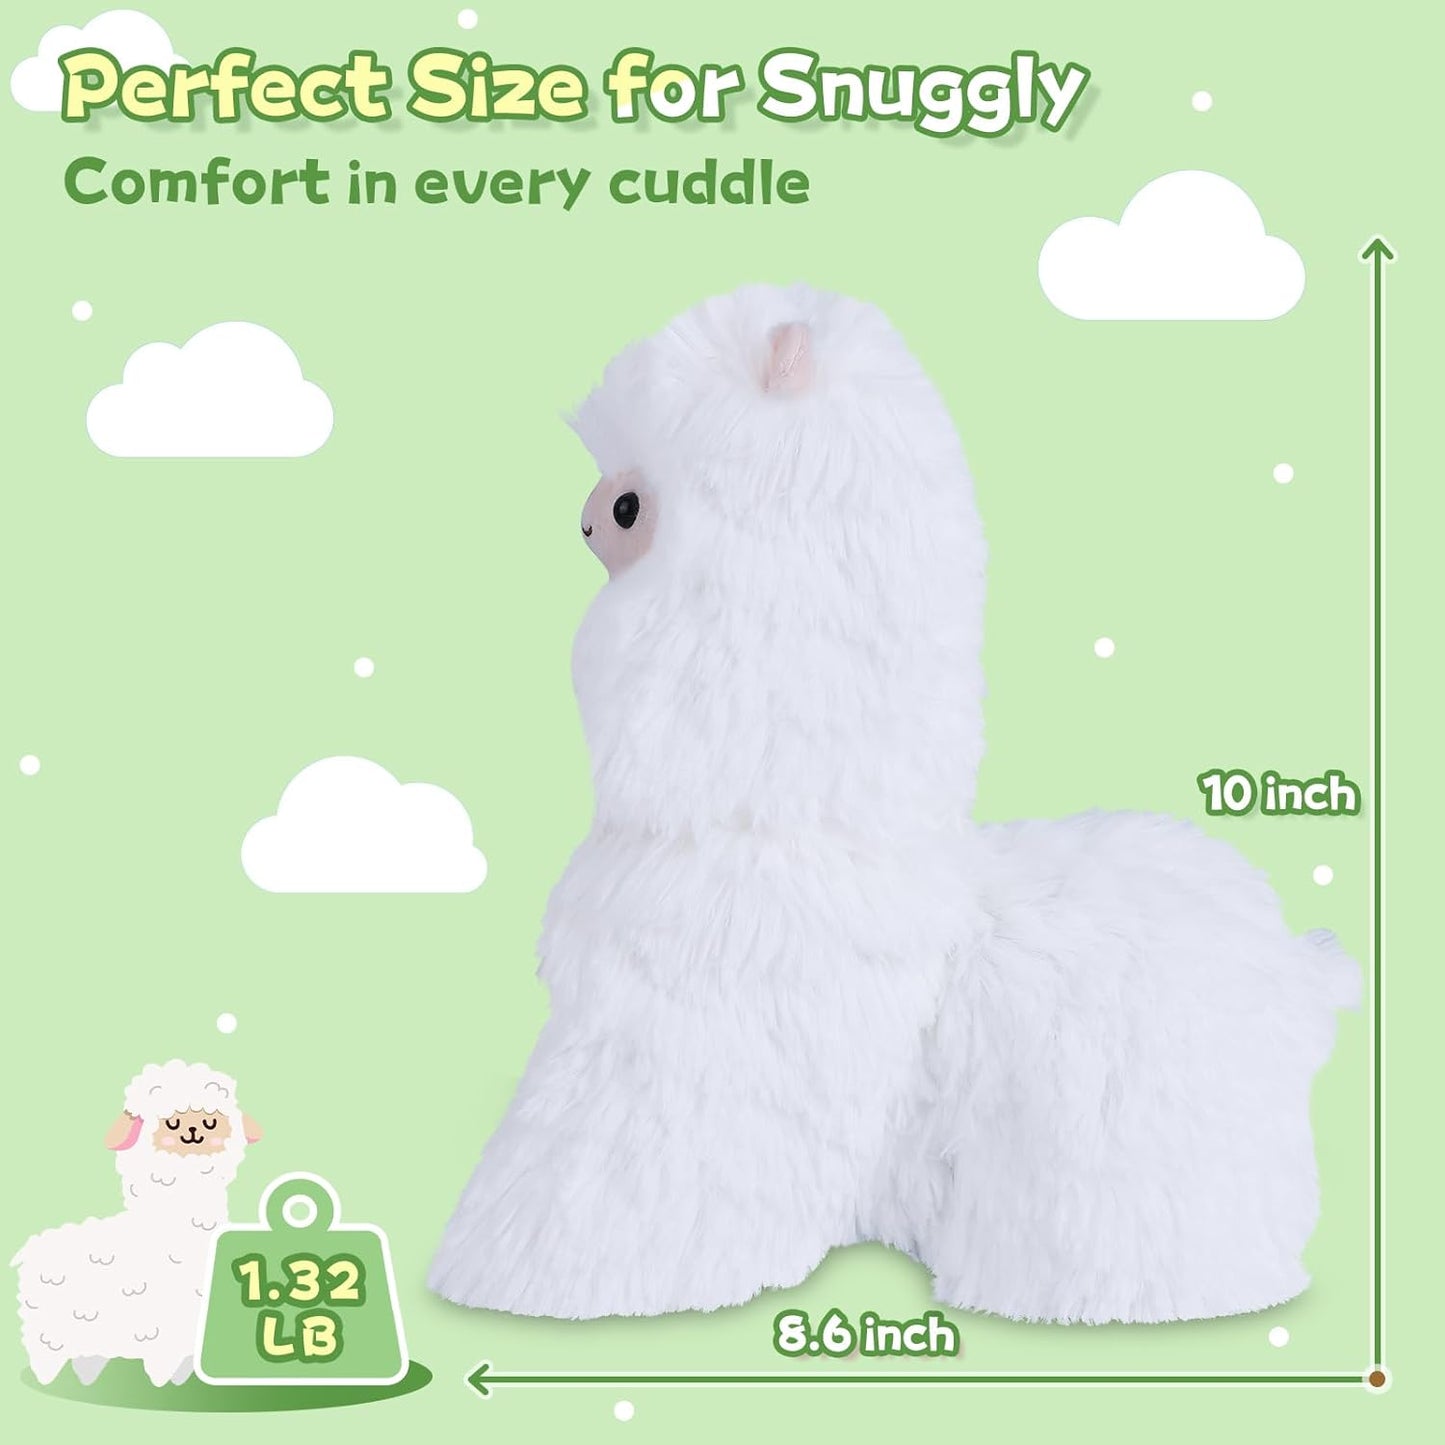 SuzziPals Alpaca Llama Stuffed Animals, Microwavable Stuffed Animals Heating Pads for Cramps, Anxiety & Stress Relief, Cuddly Alpaca Stuffed Animals, Llama Plush Toys for Kids, Plushies Llama Gifts